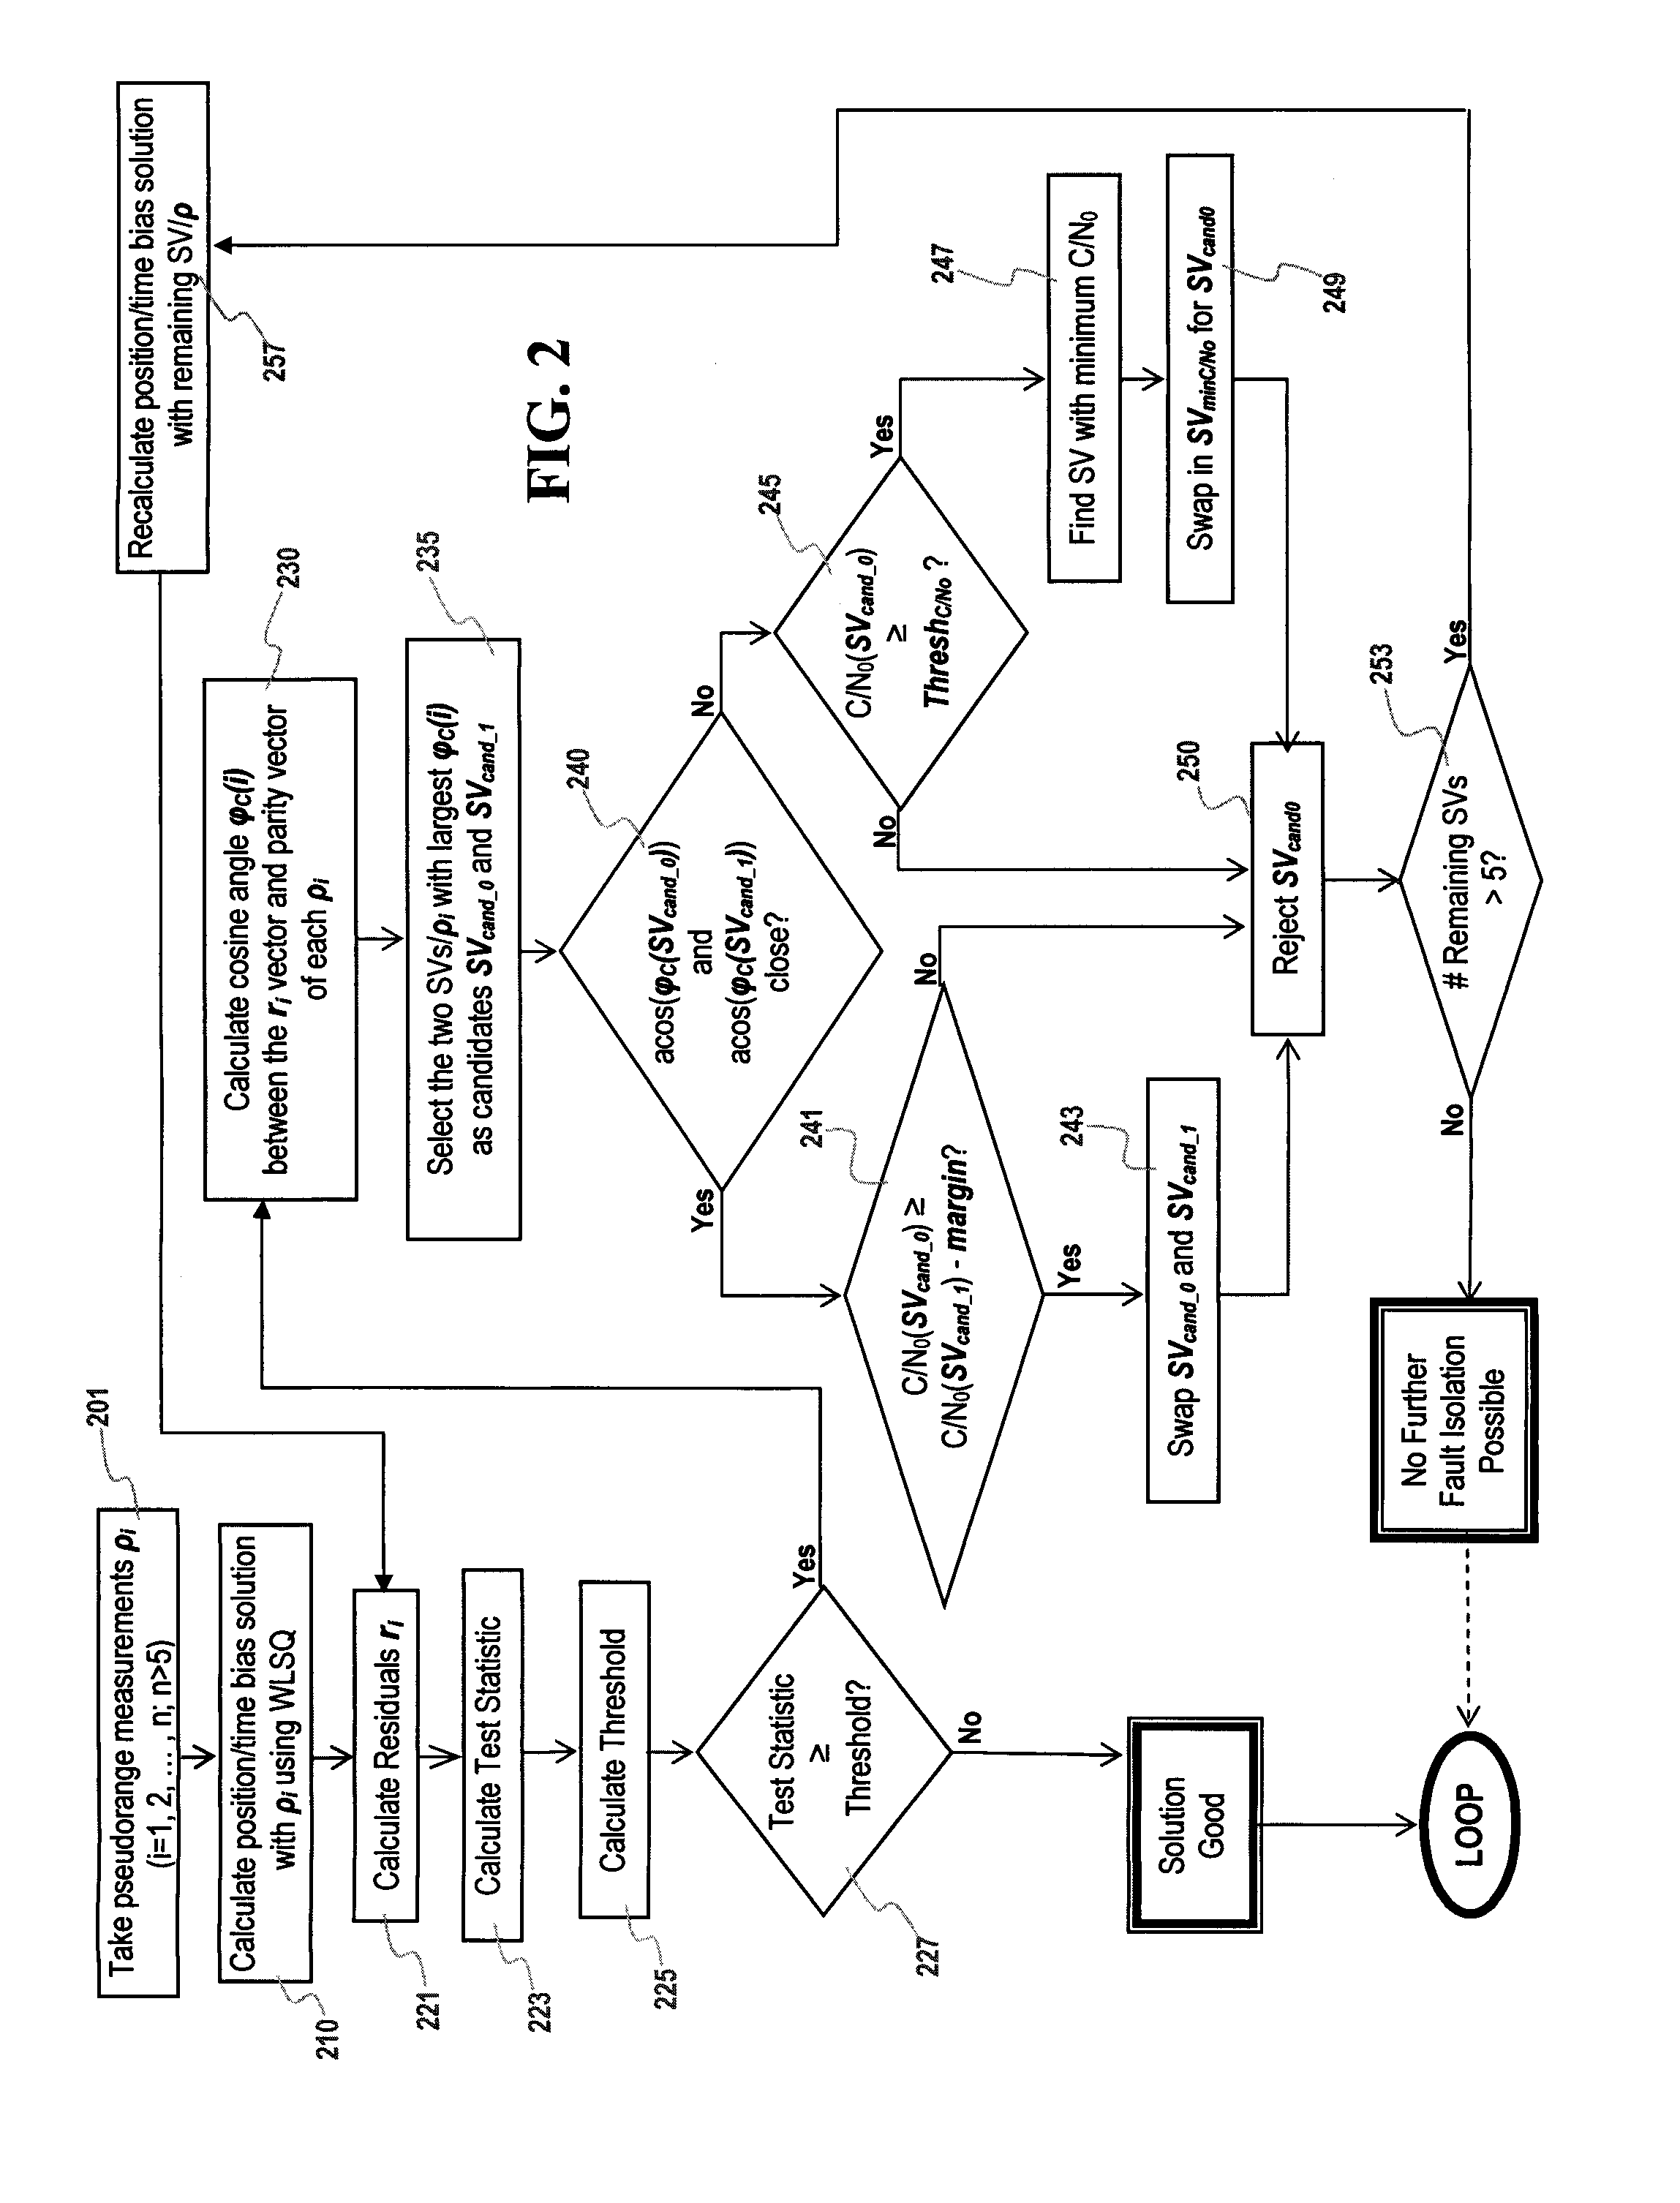 Method of multiple satellite measurement failure detection and isolation for GNSS